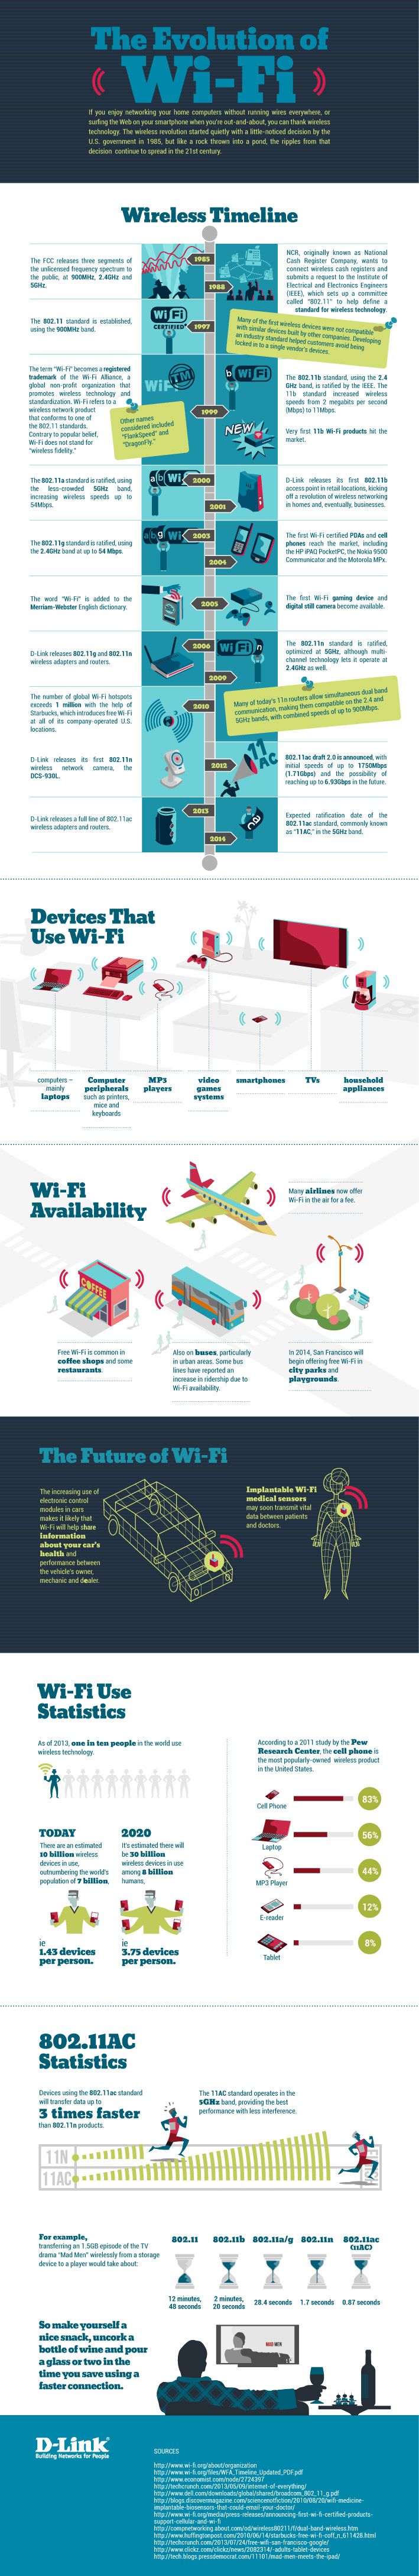 The Evolution of Wi-Fi | D-Link Resource Center